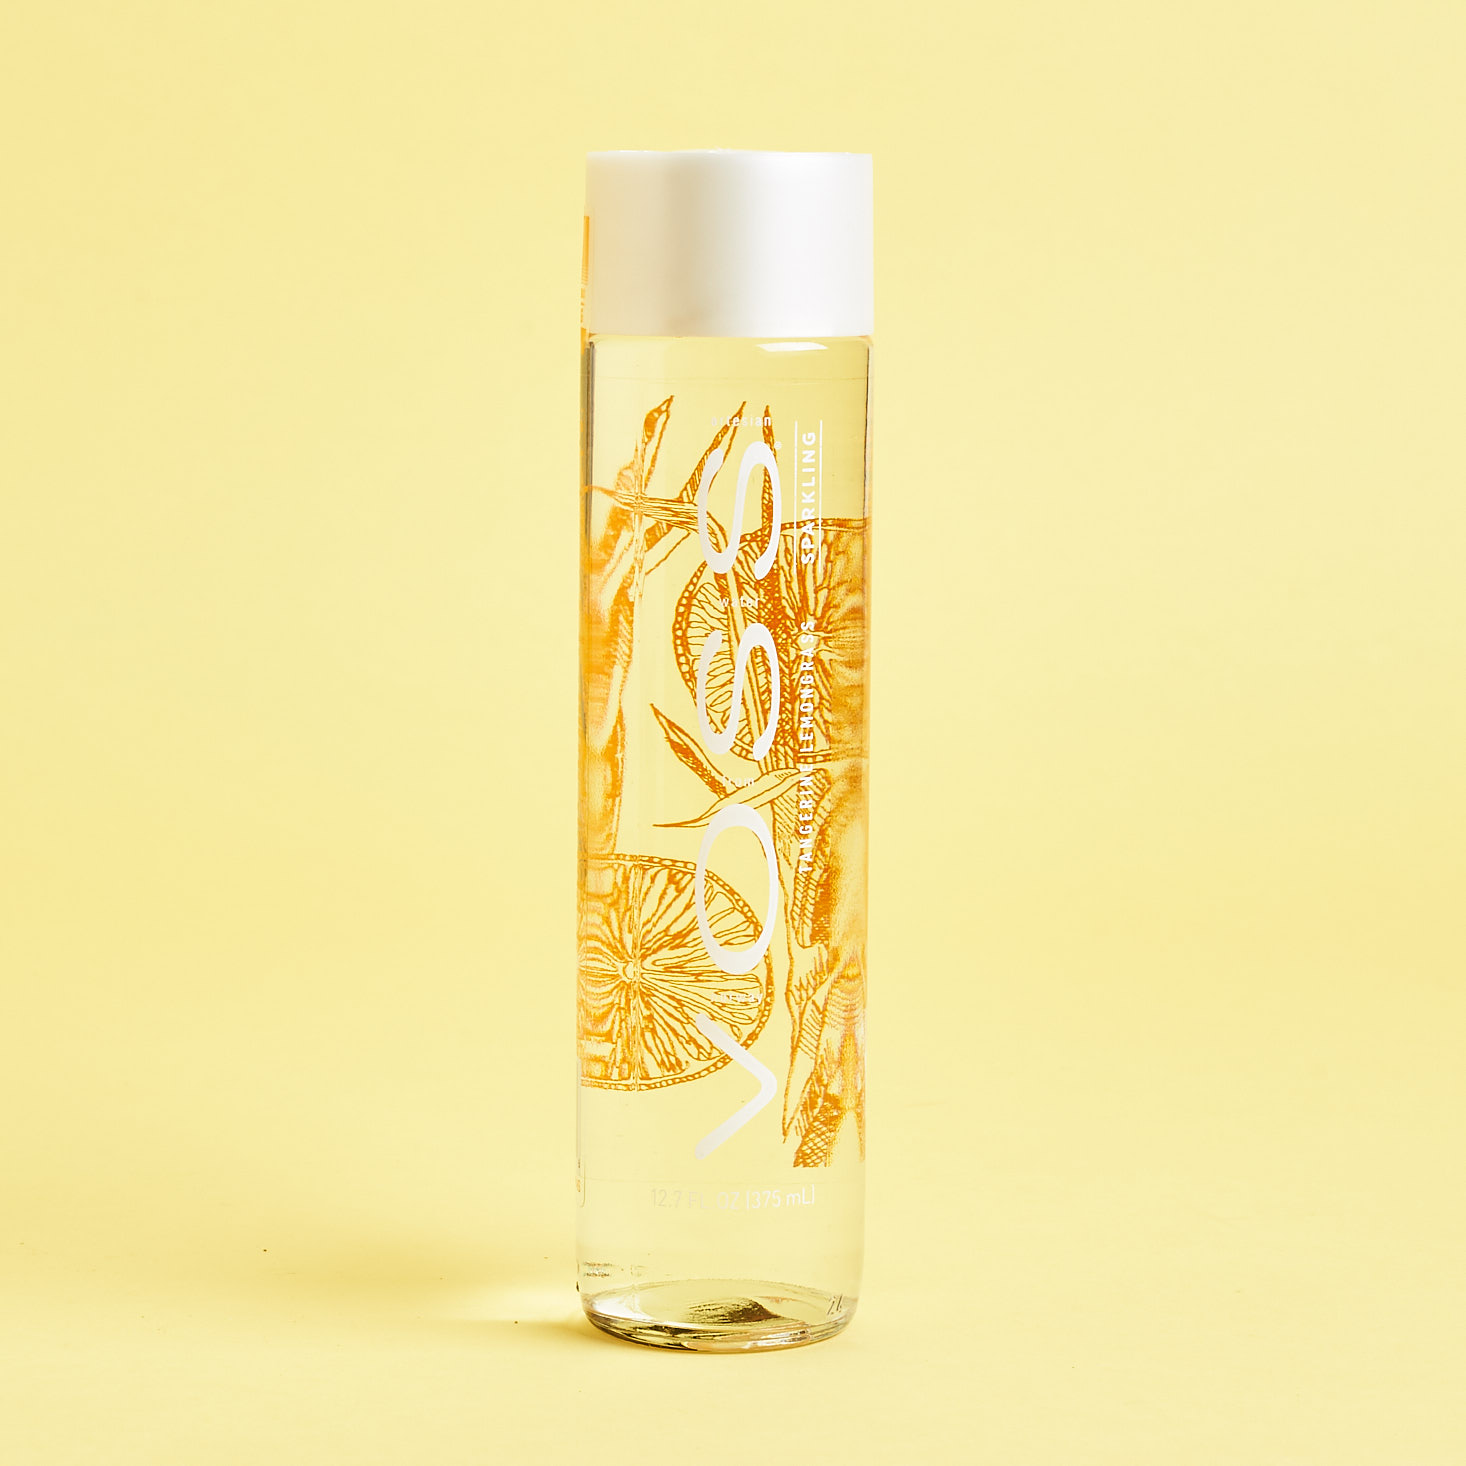 Robb Vices June 2019 voss water